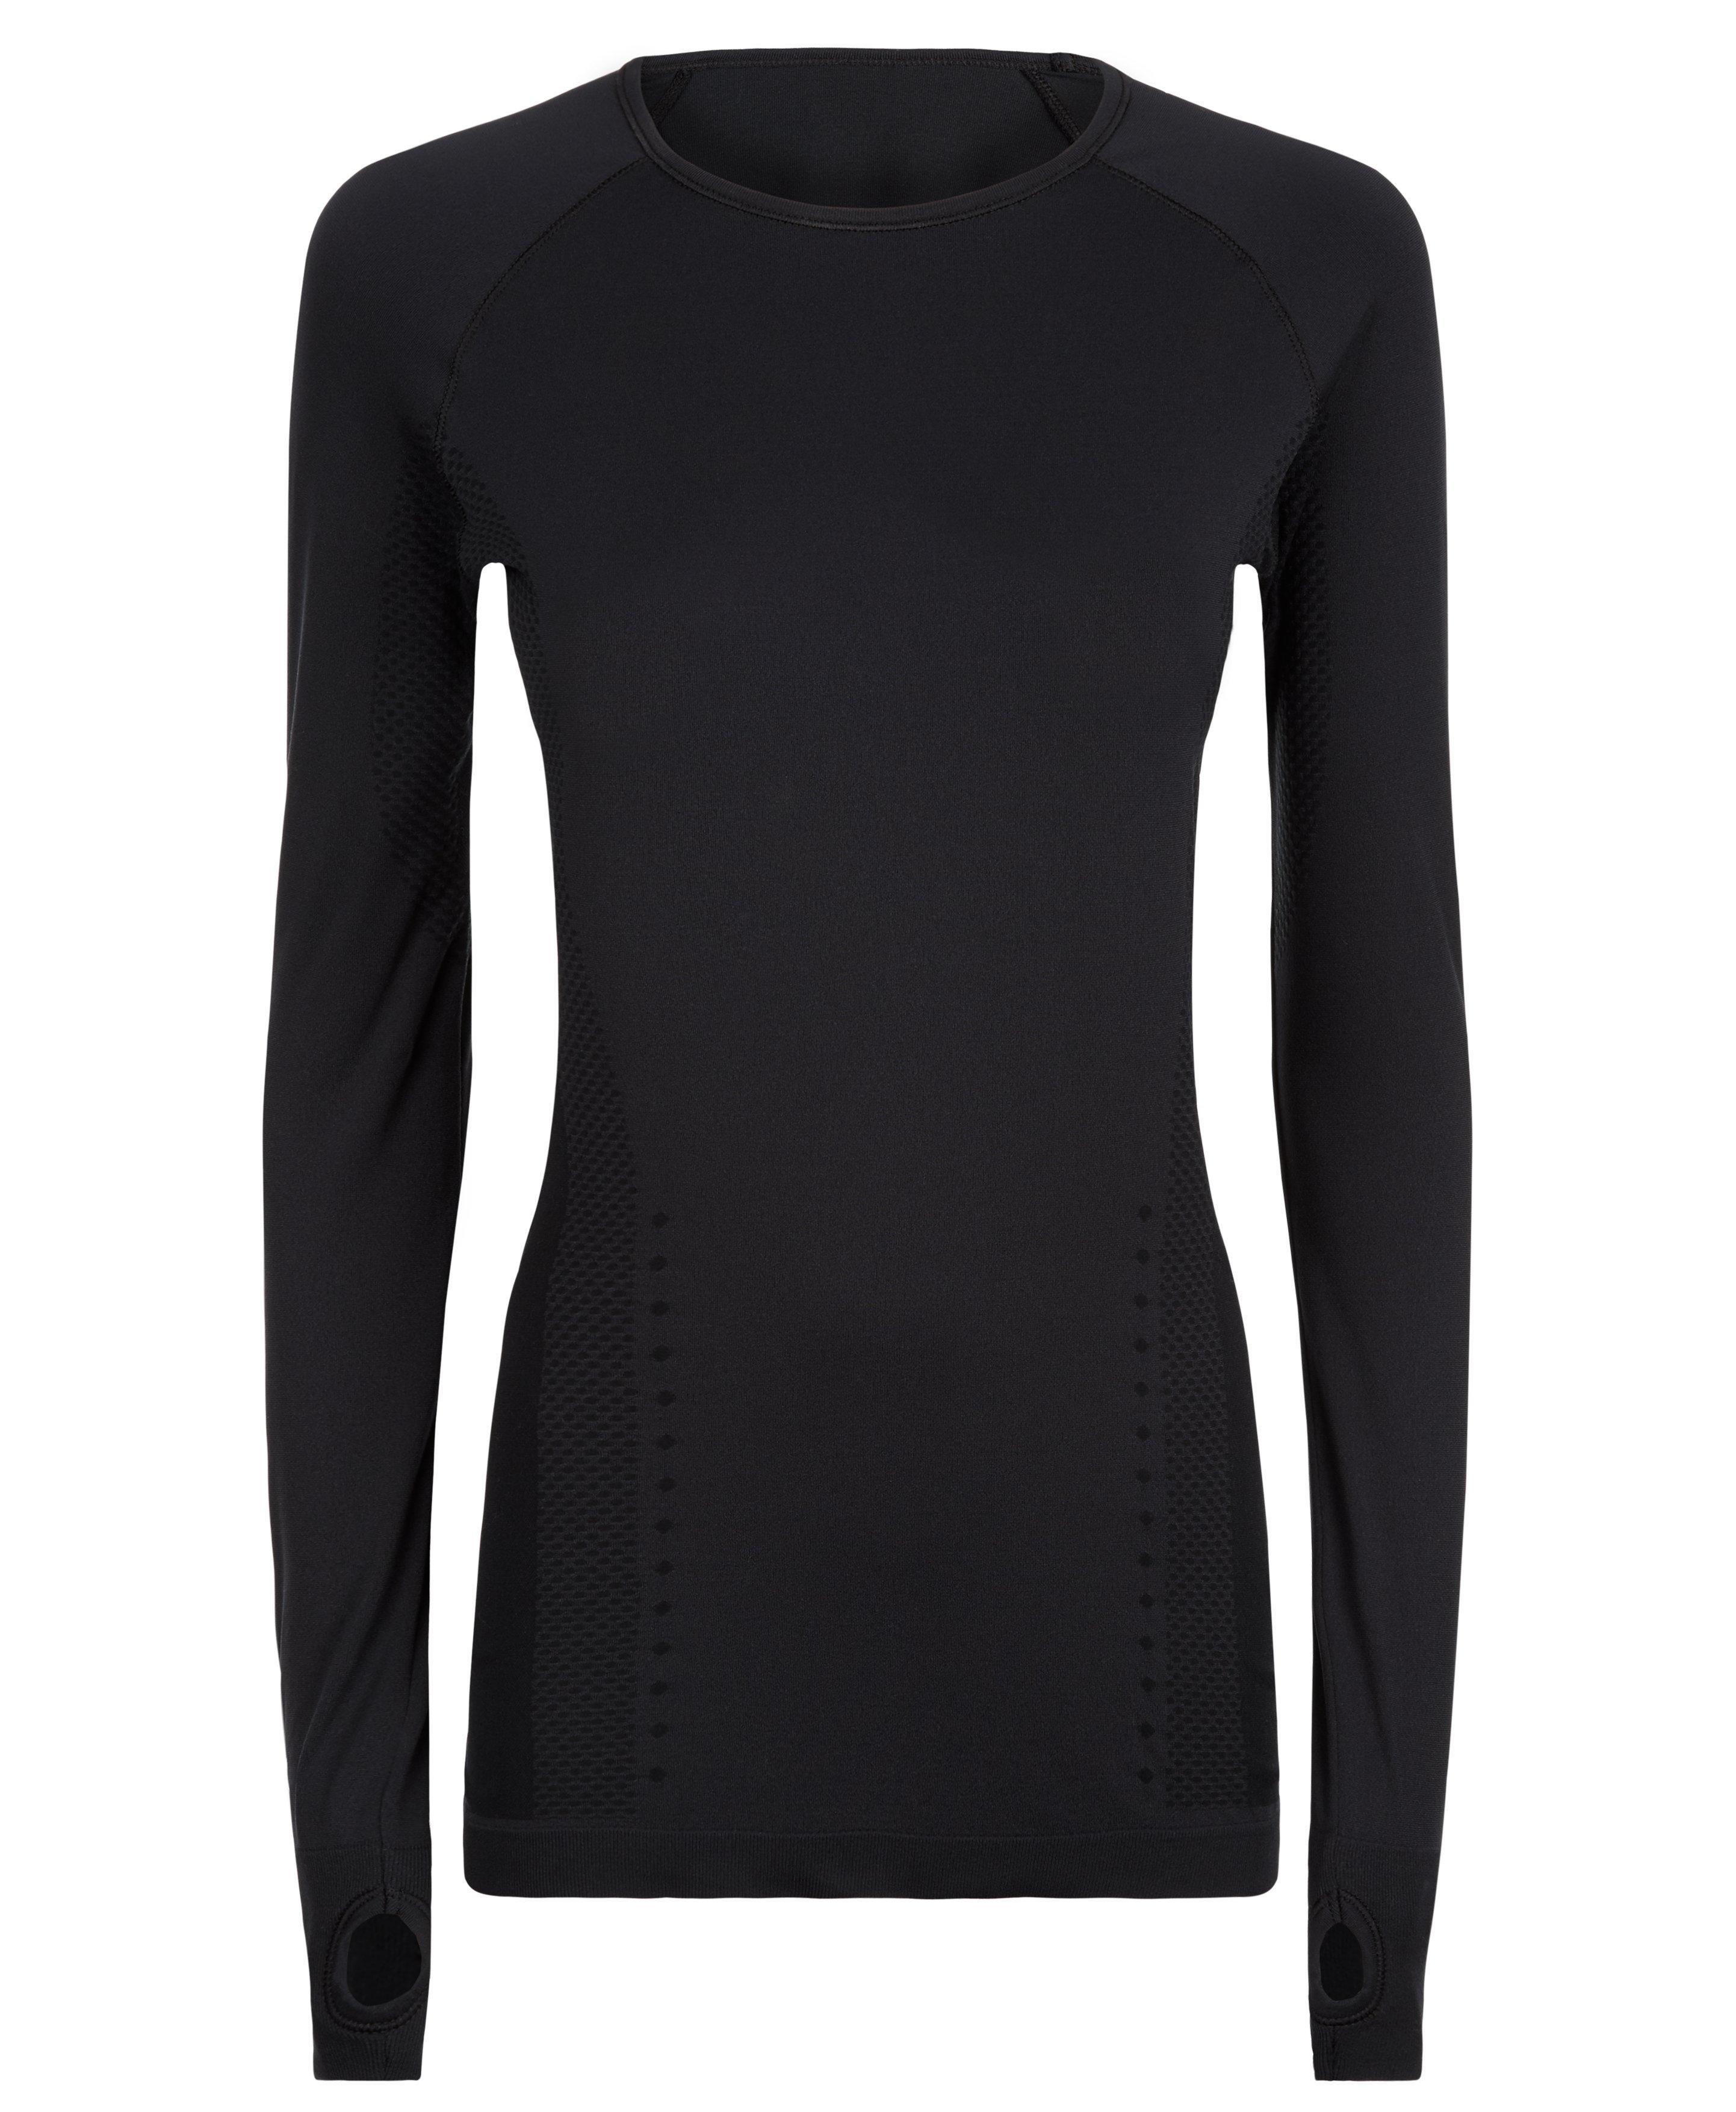 A must-have workout layer with leading multi-sport technology, this slim-fit style is designed using fabric that feels soft and breathable on skin. Ideal for high-intensity exercise.